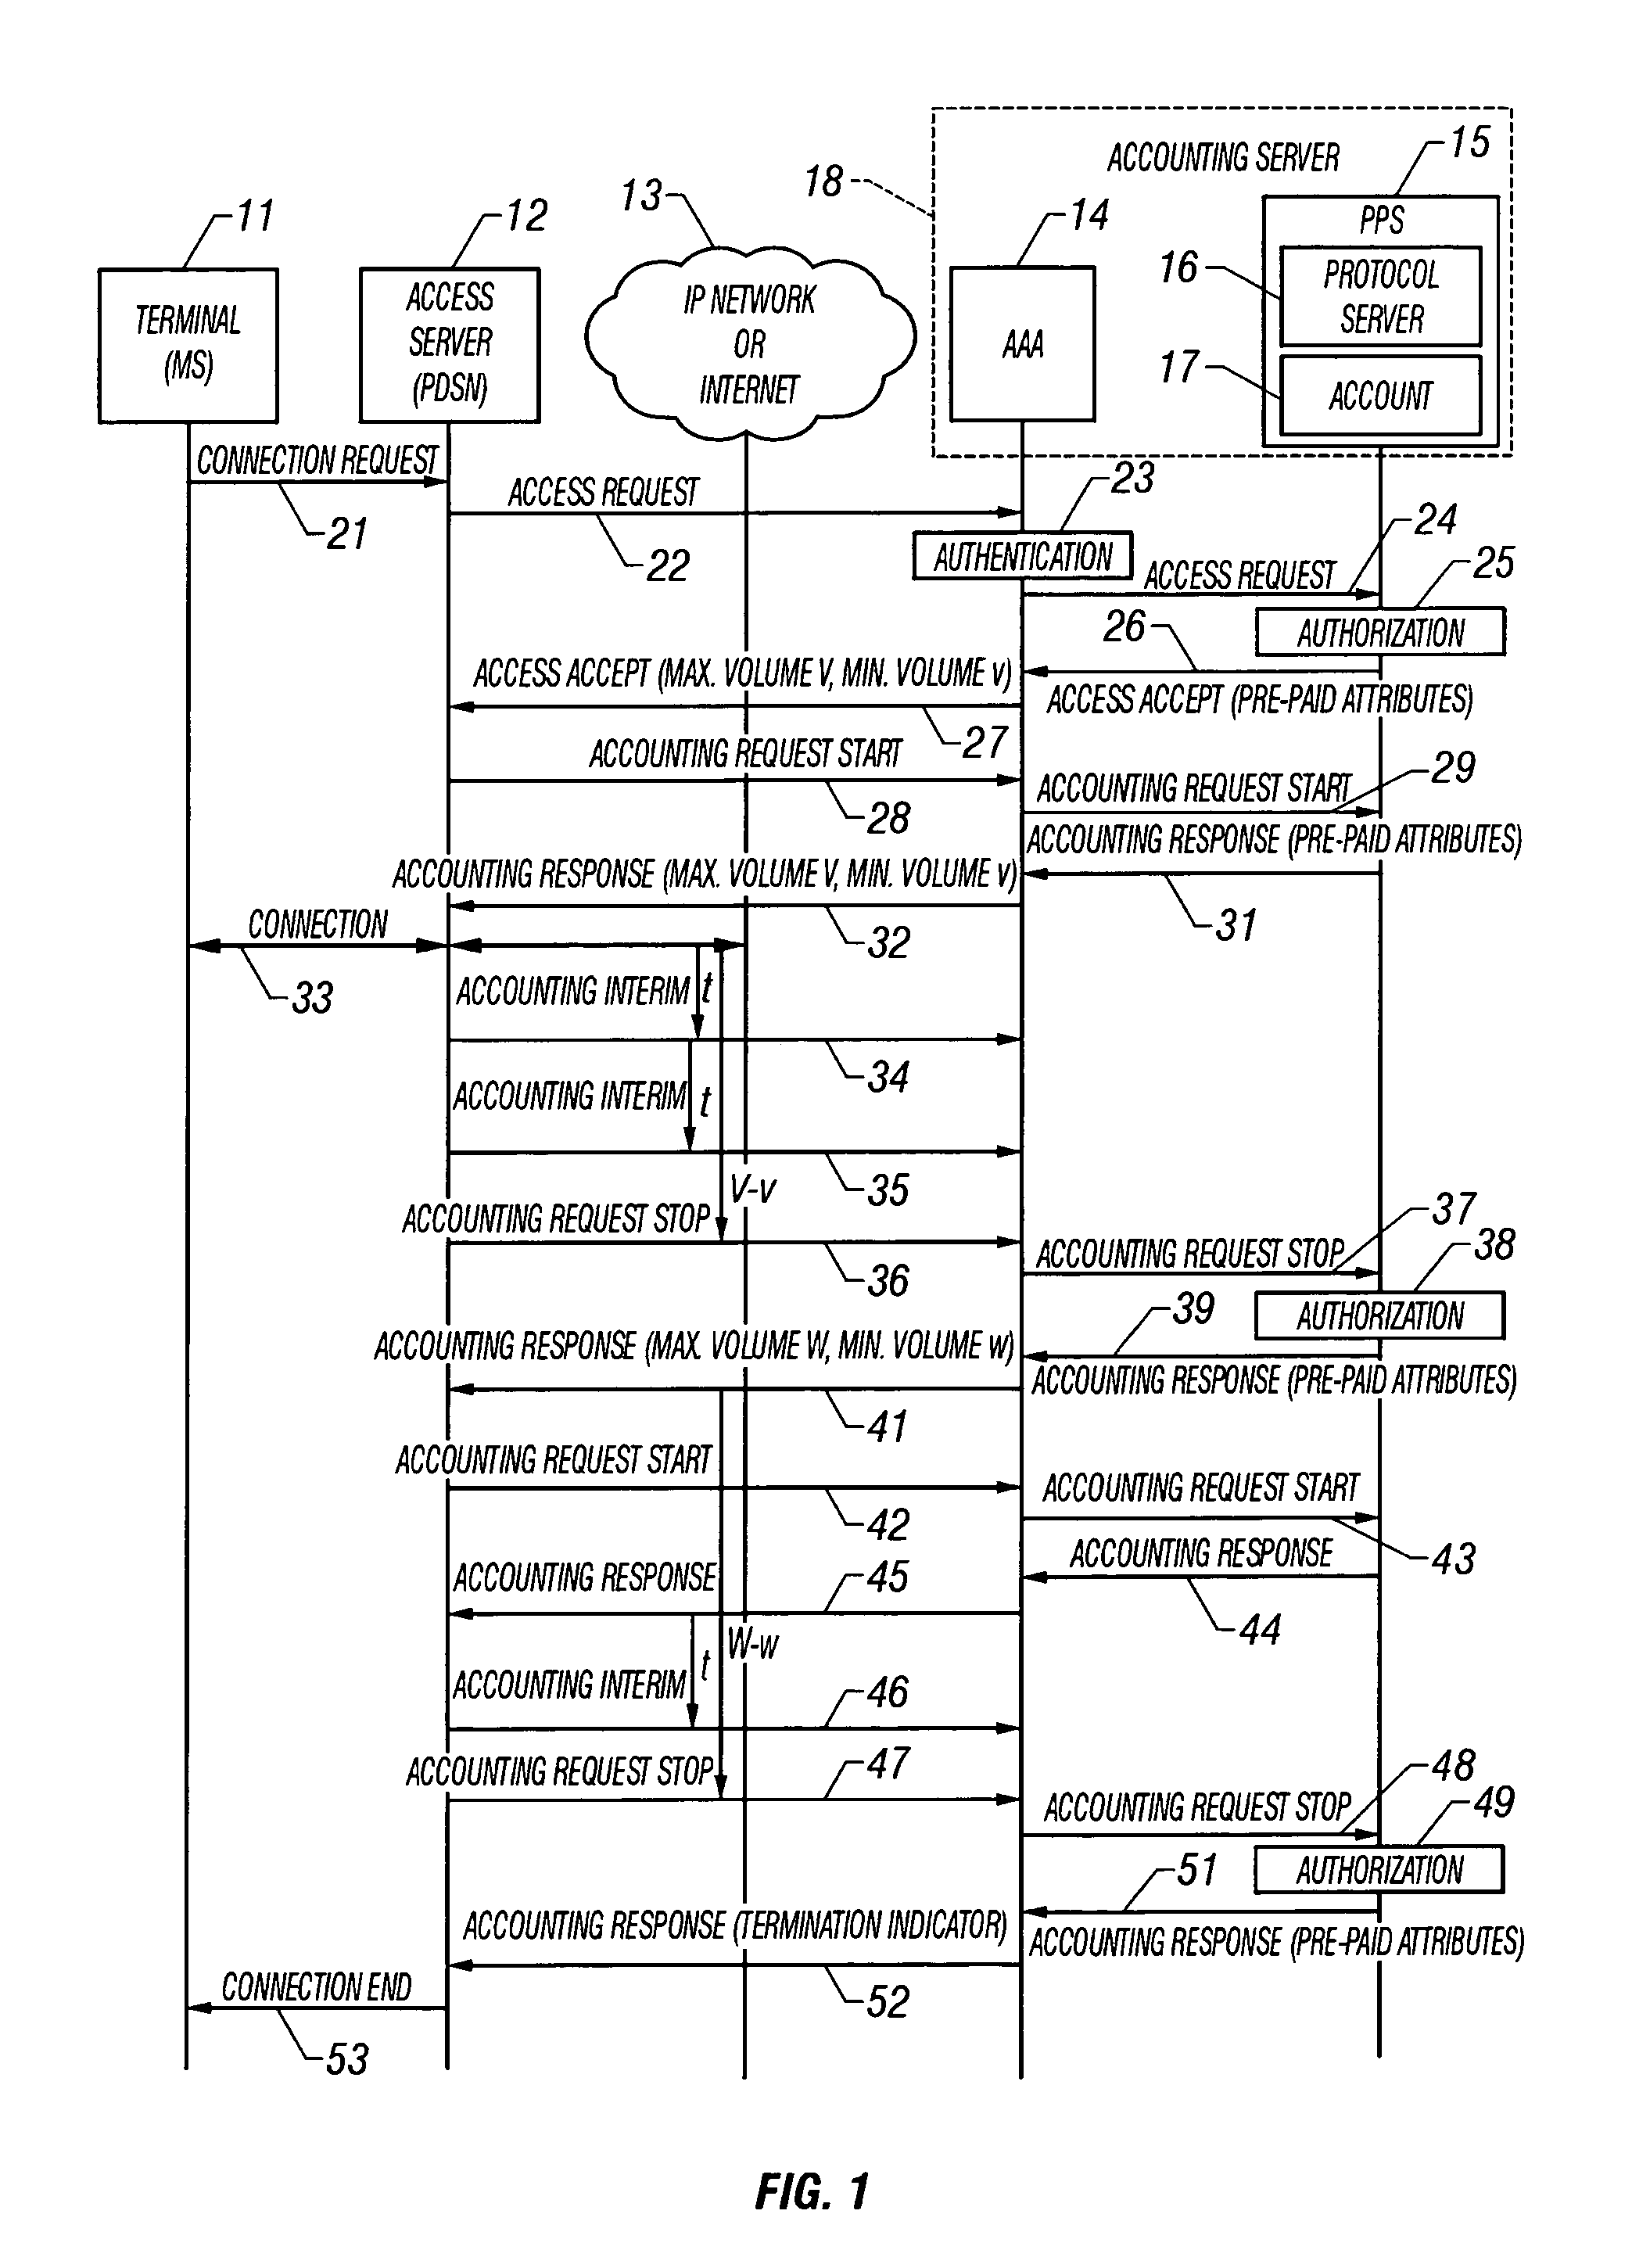 System and method of monitoring and reporting accounting data based on volume